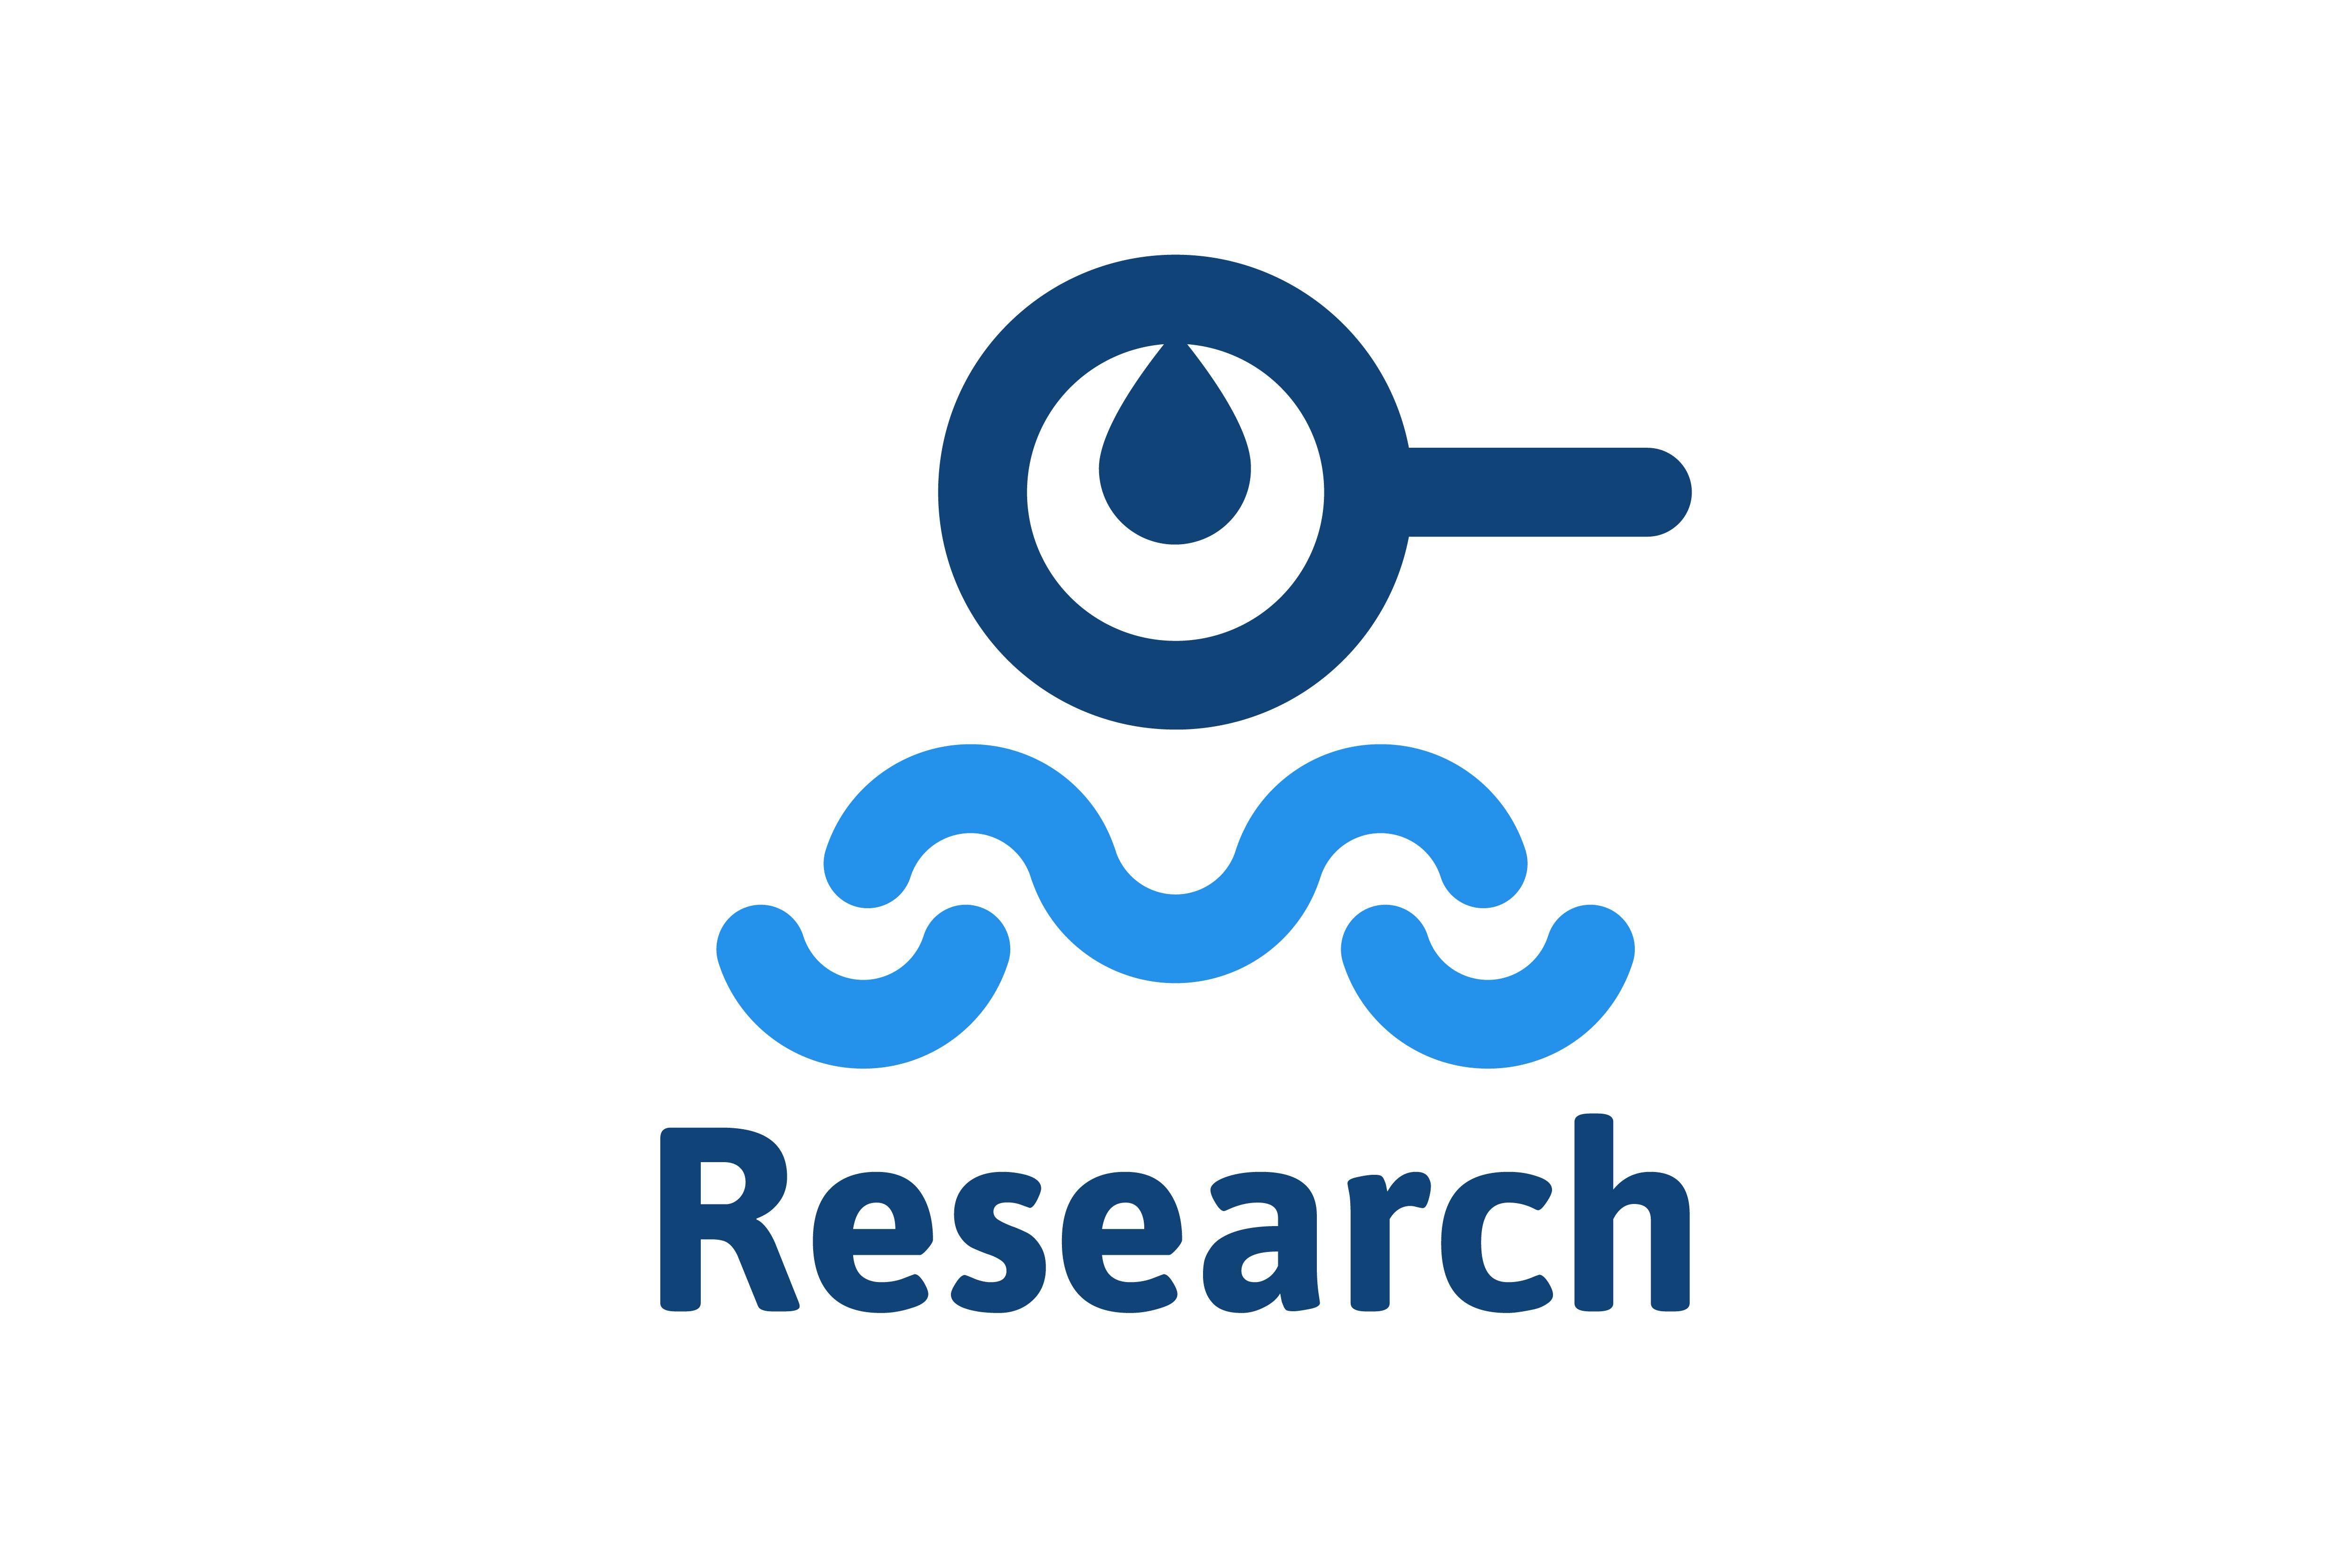 Research Logo - Magnifying glass, research logo